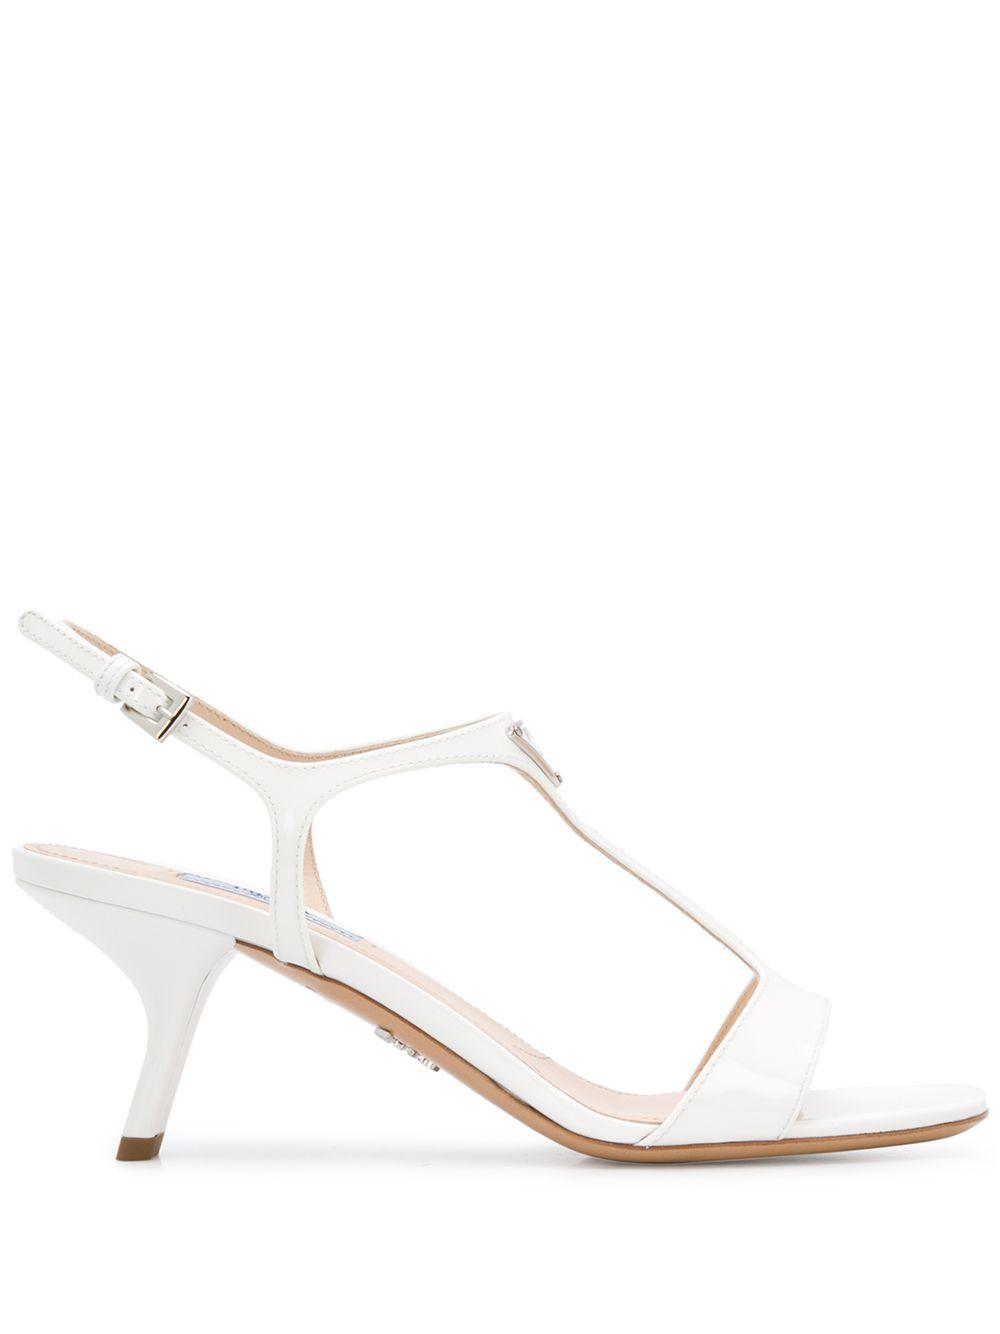 Prada Leather 65mm Sandals in White - Save 34% - Lyst